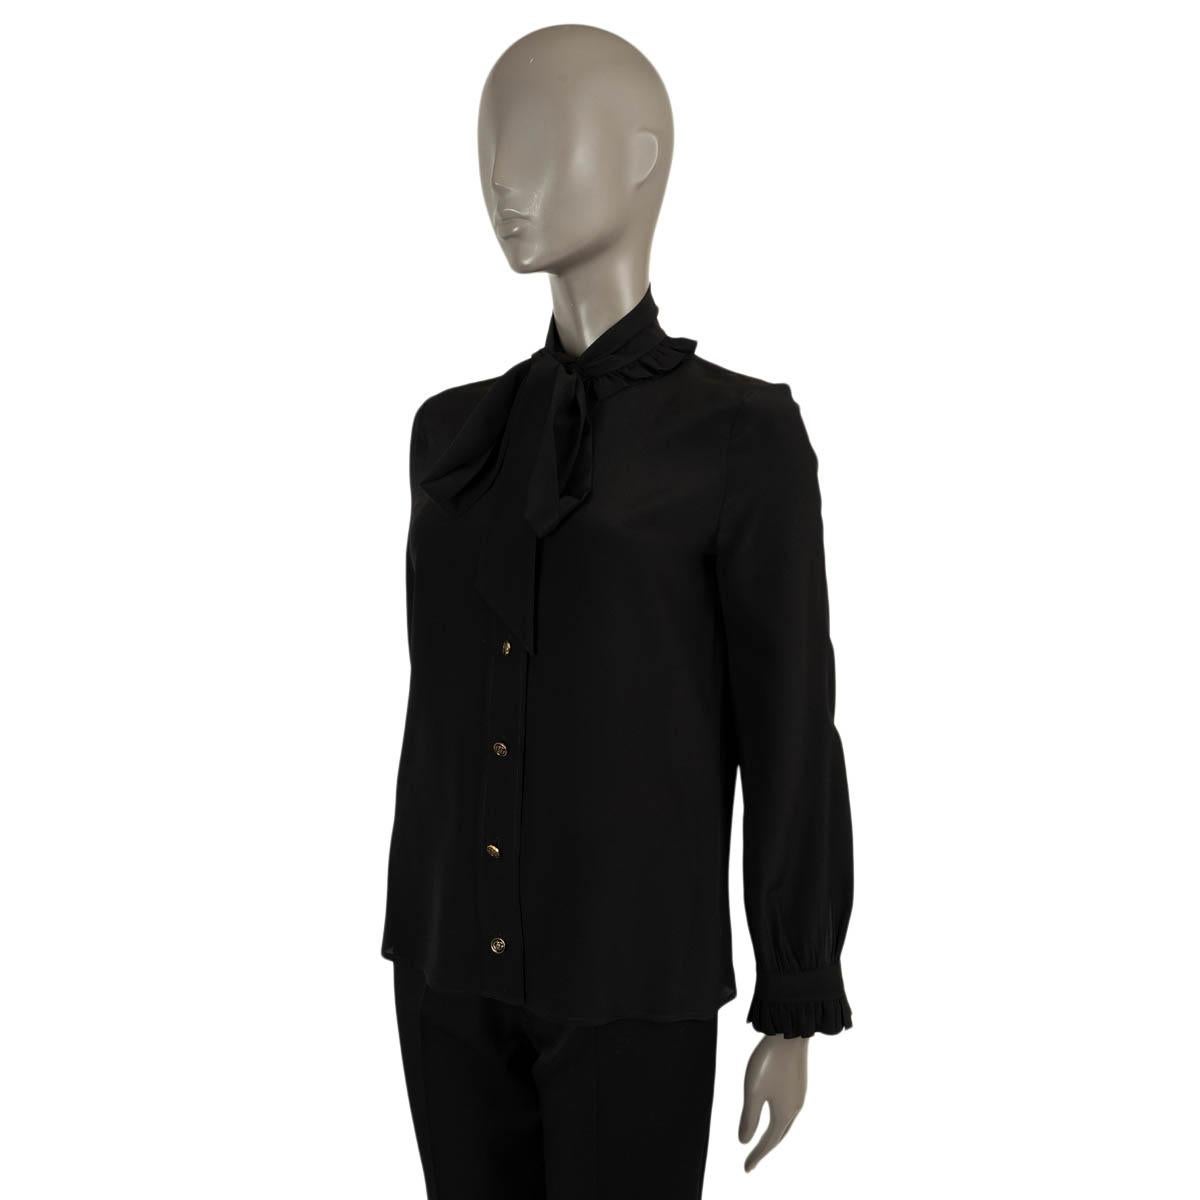 100% authentic Gucci pussy-bow blouse in black silk crepe (100%). Features ruffle trim along the neck and cuffs with buttoned strap detail. Closes with gold-tone logo buttons on the front. Has been worn and is in excellent